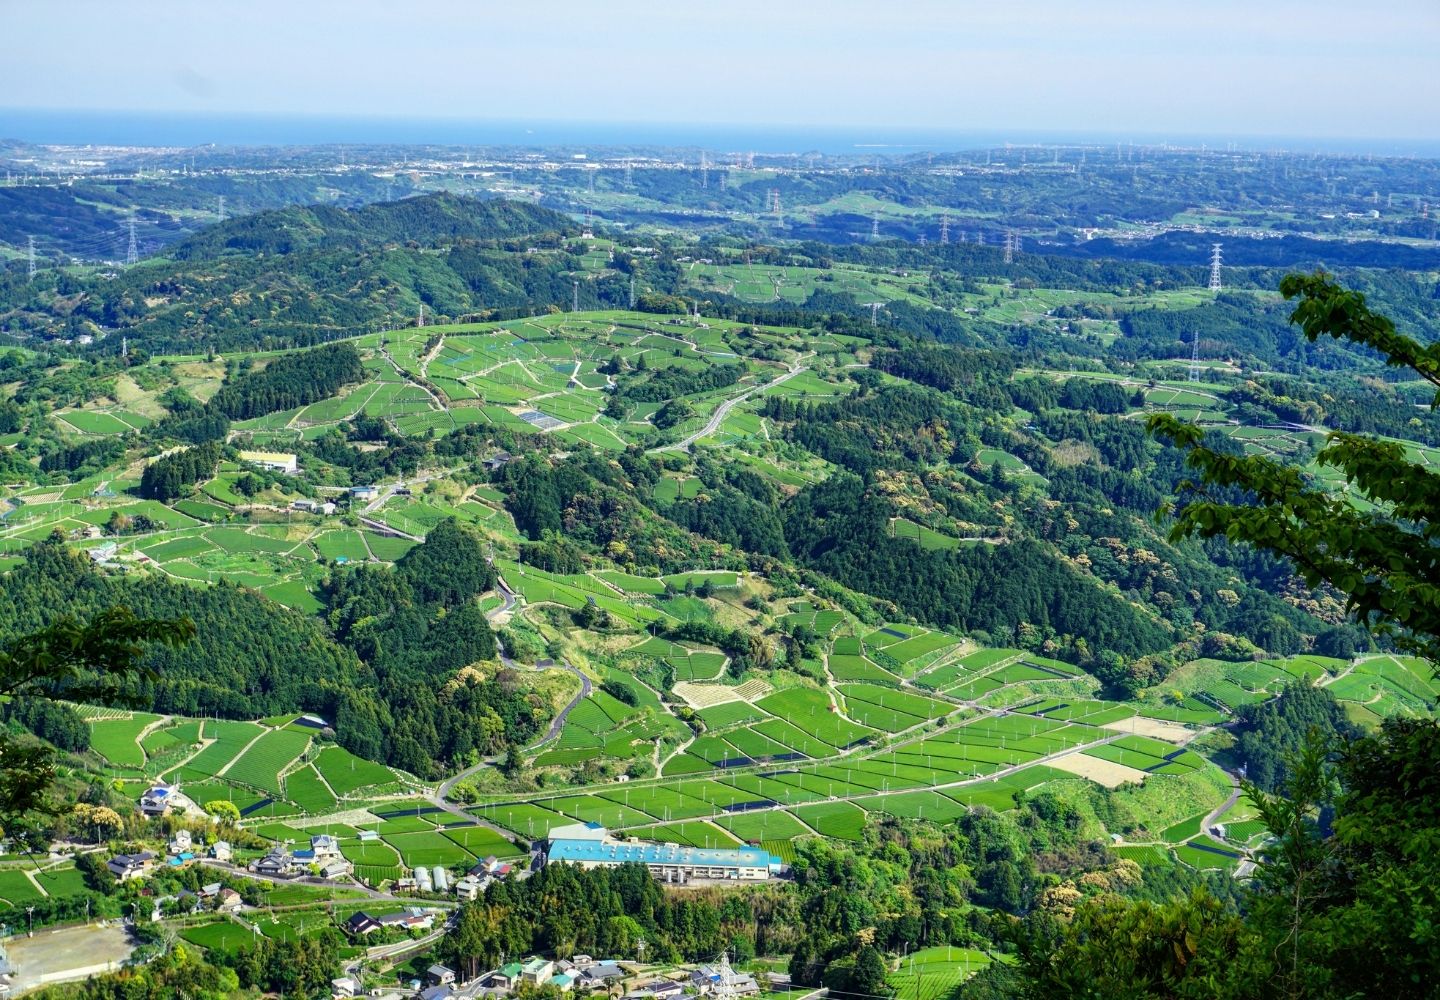 A photo looking down at the tea fields of Shizuoka in Japan. This is the region in which our GABA Sencha green tea is grown.